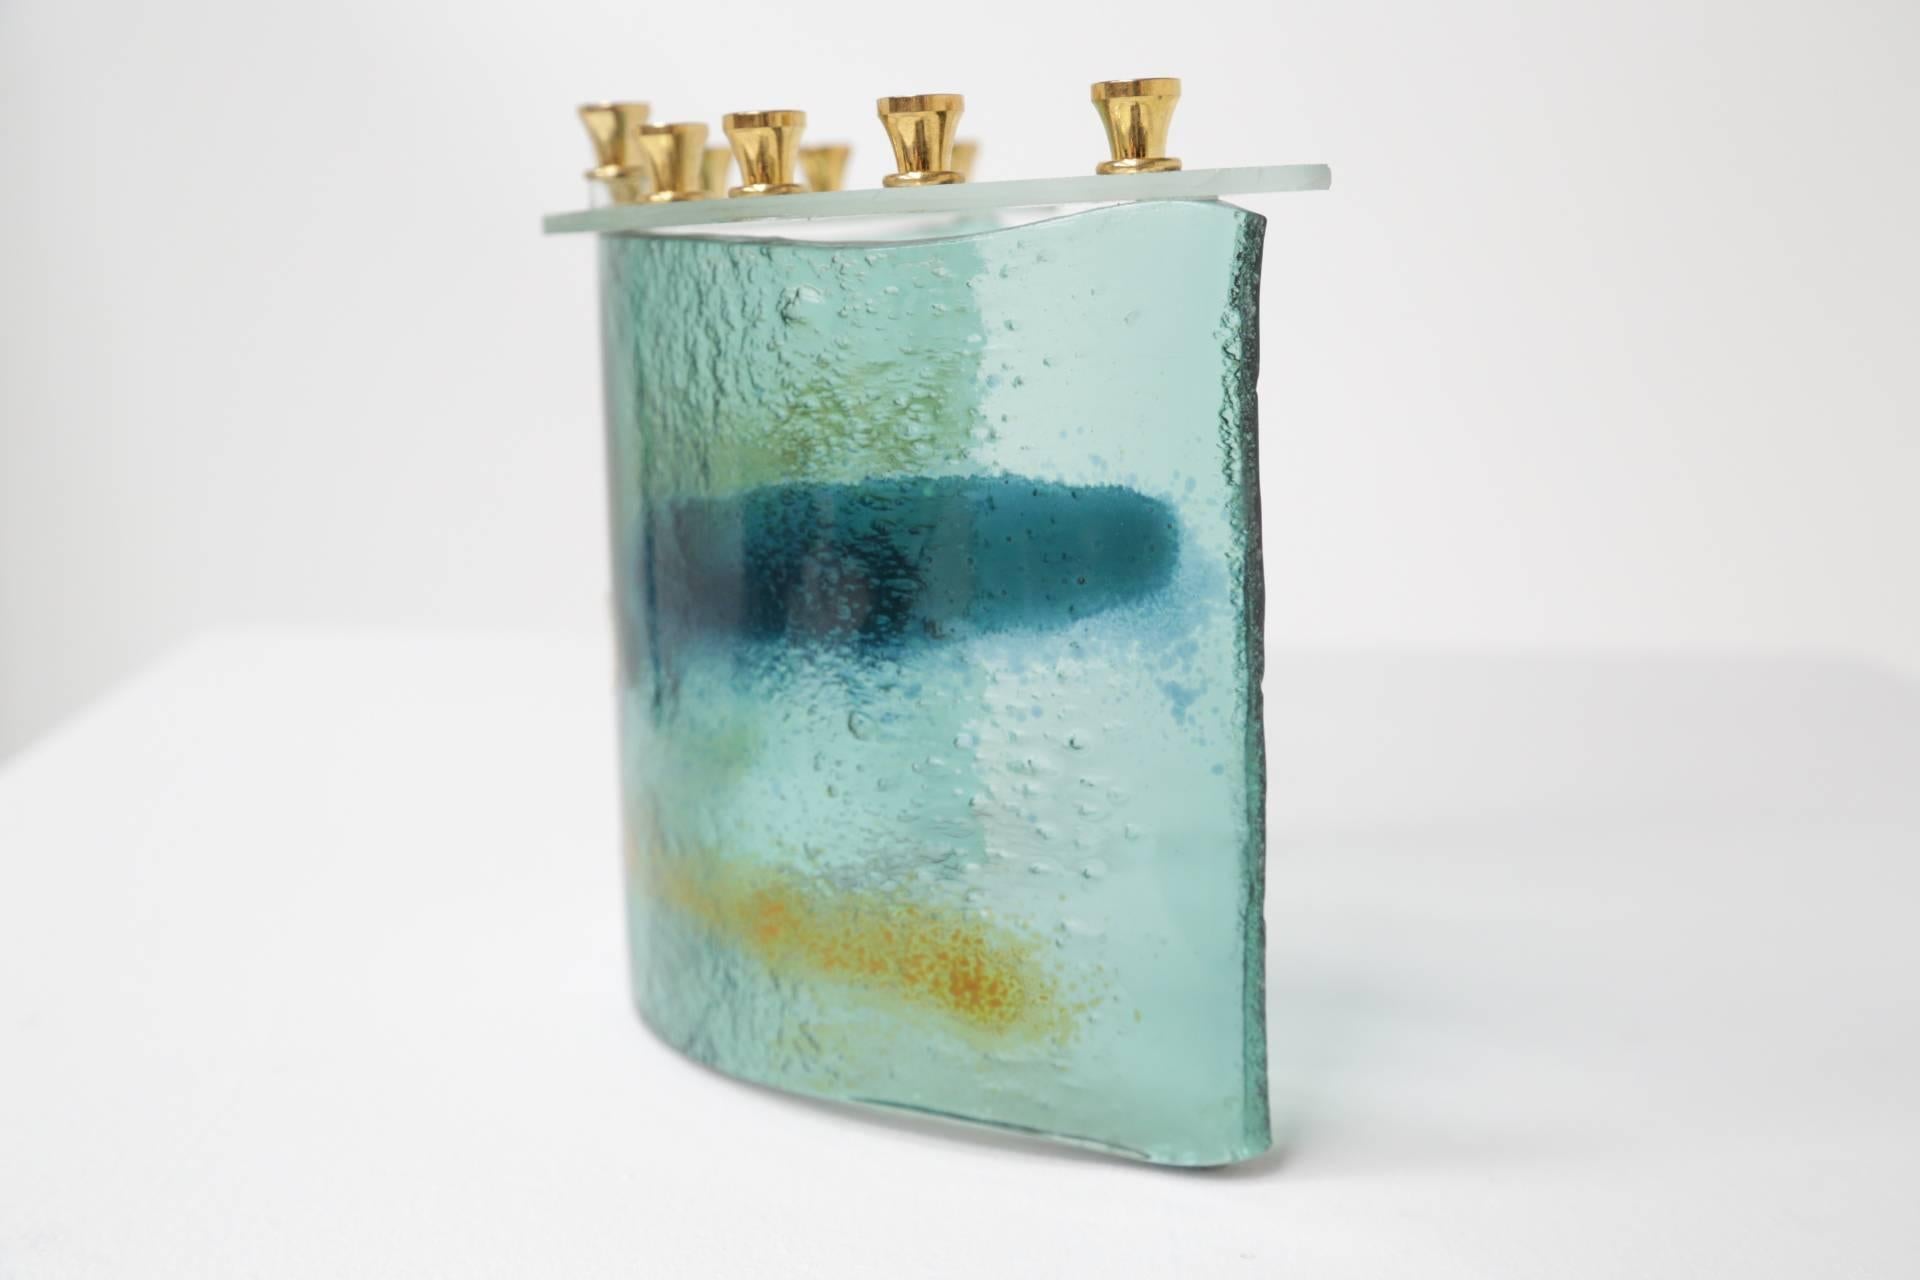 This is an absolutely sublime fused art glass Hanukkah menorah or hanukiah. Israeli Artist, Hanna Bahral, made this beautiful curved piece. She trained and honed her craft in the US before opening her shop in Jerusalem in 1956. Producing a large